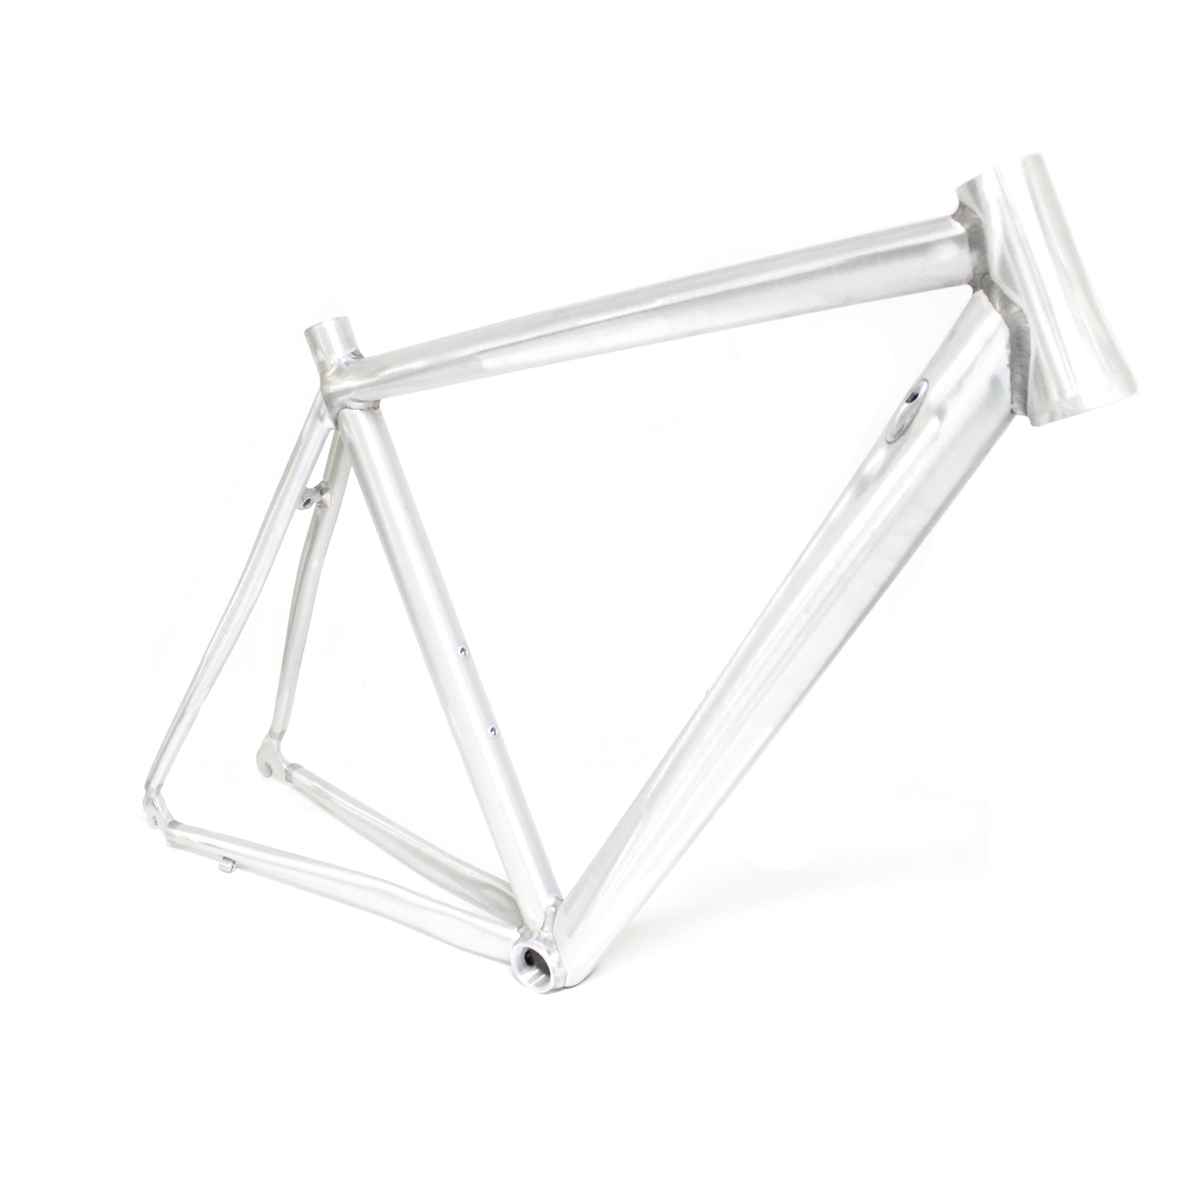 Road alloy tapered Caliper Frame size 49